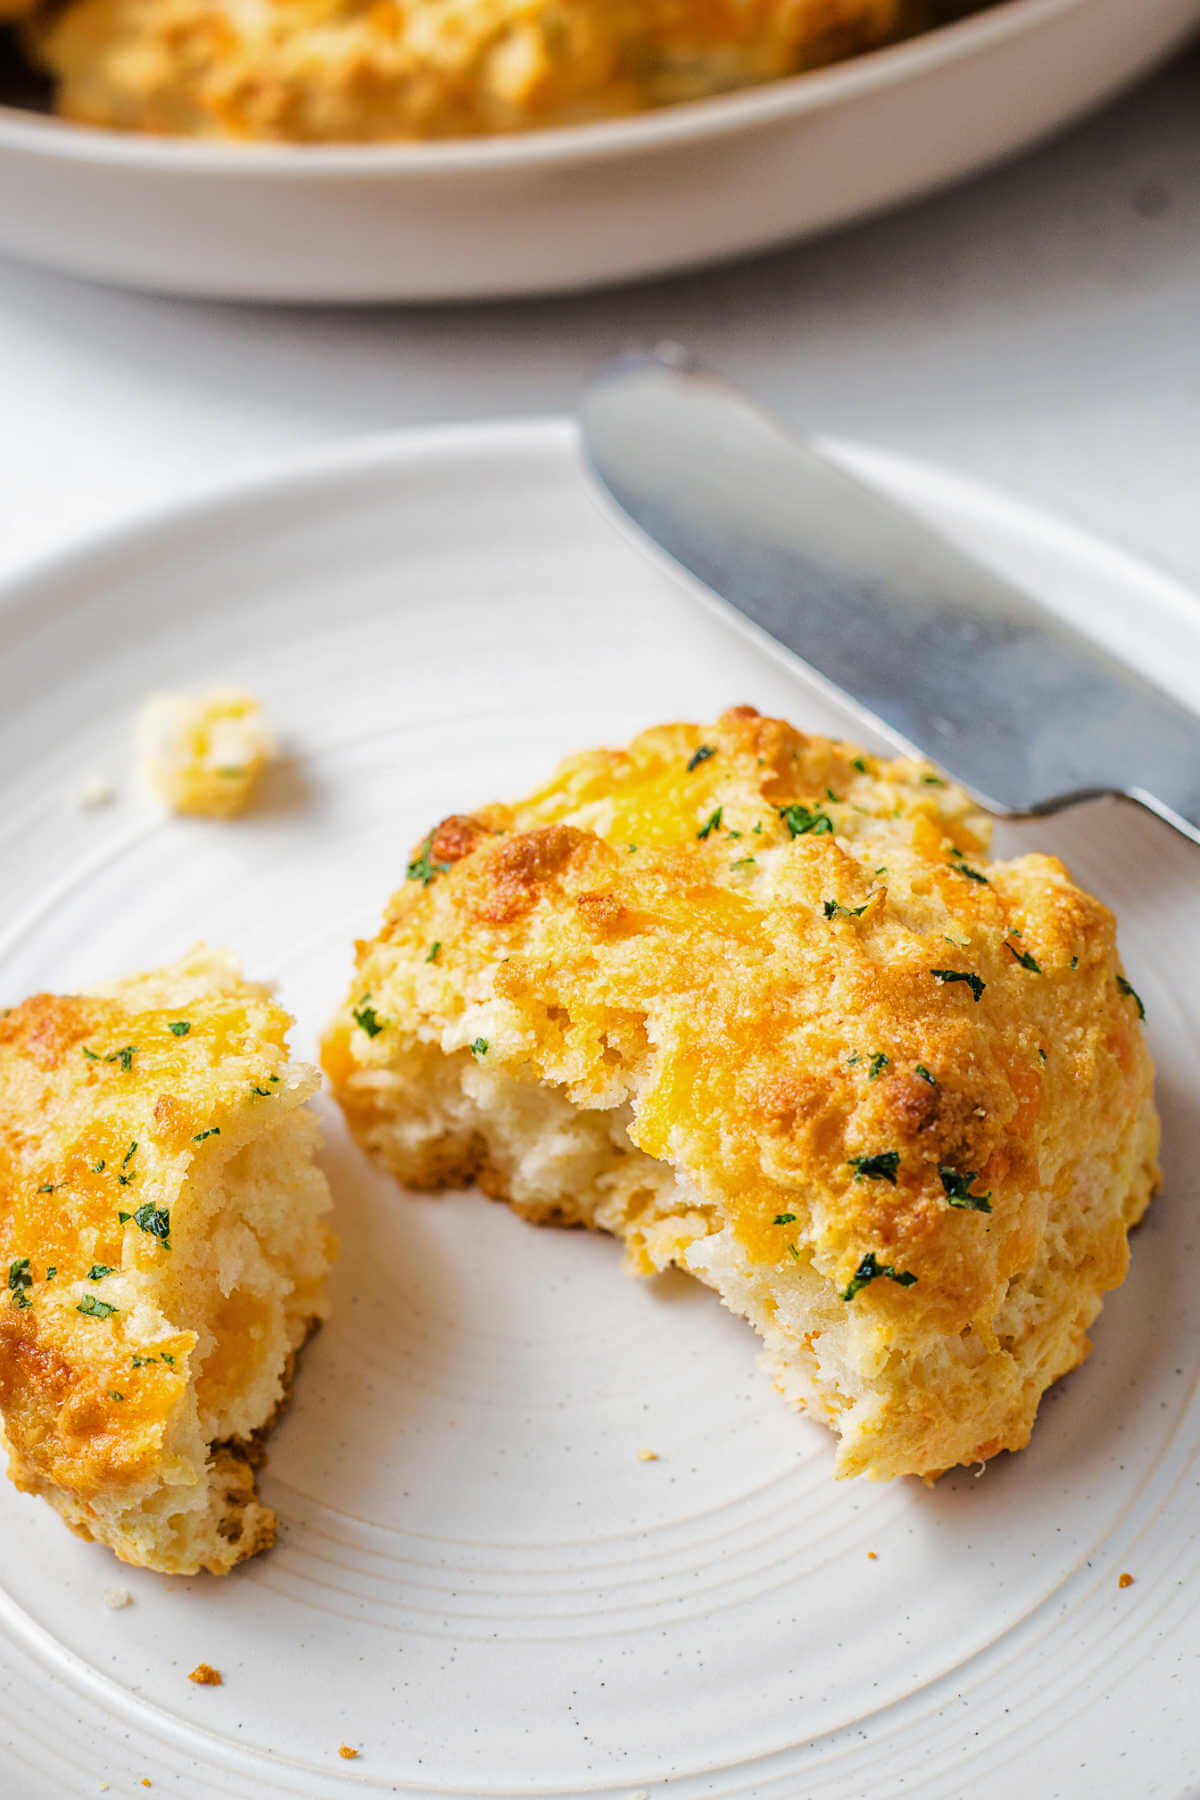 a cheddar bay biscuit broken in half on a bread plate.